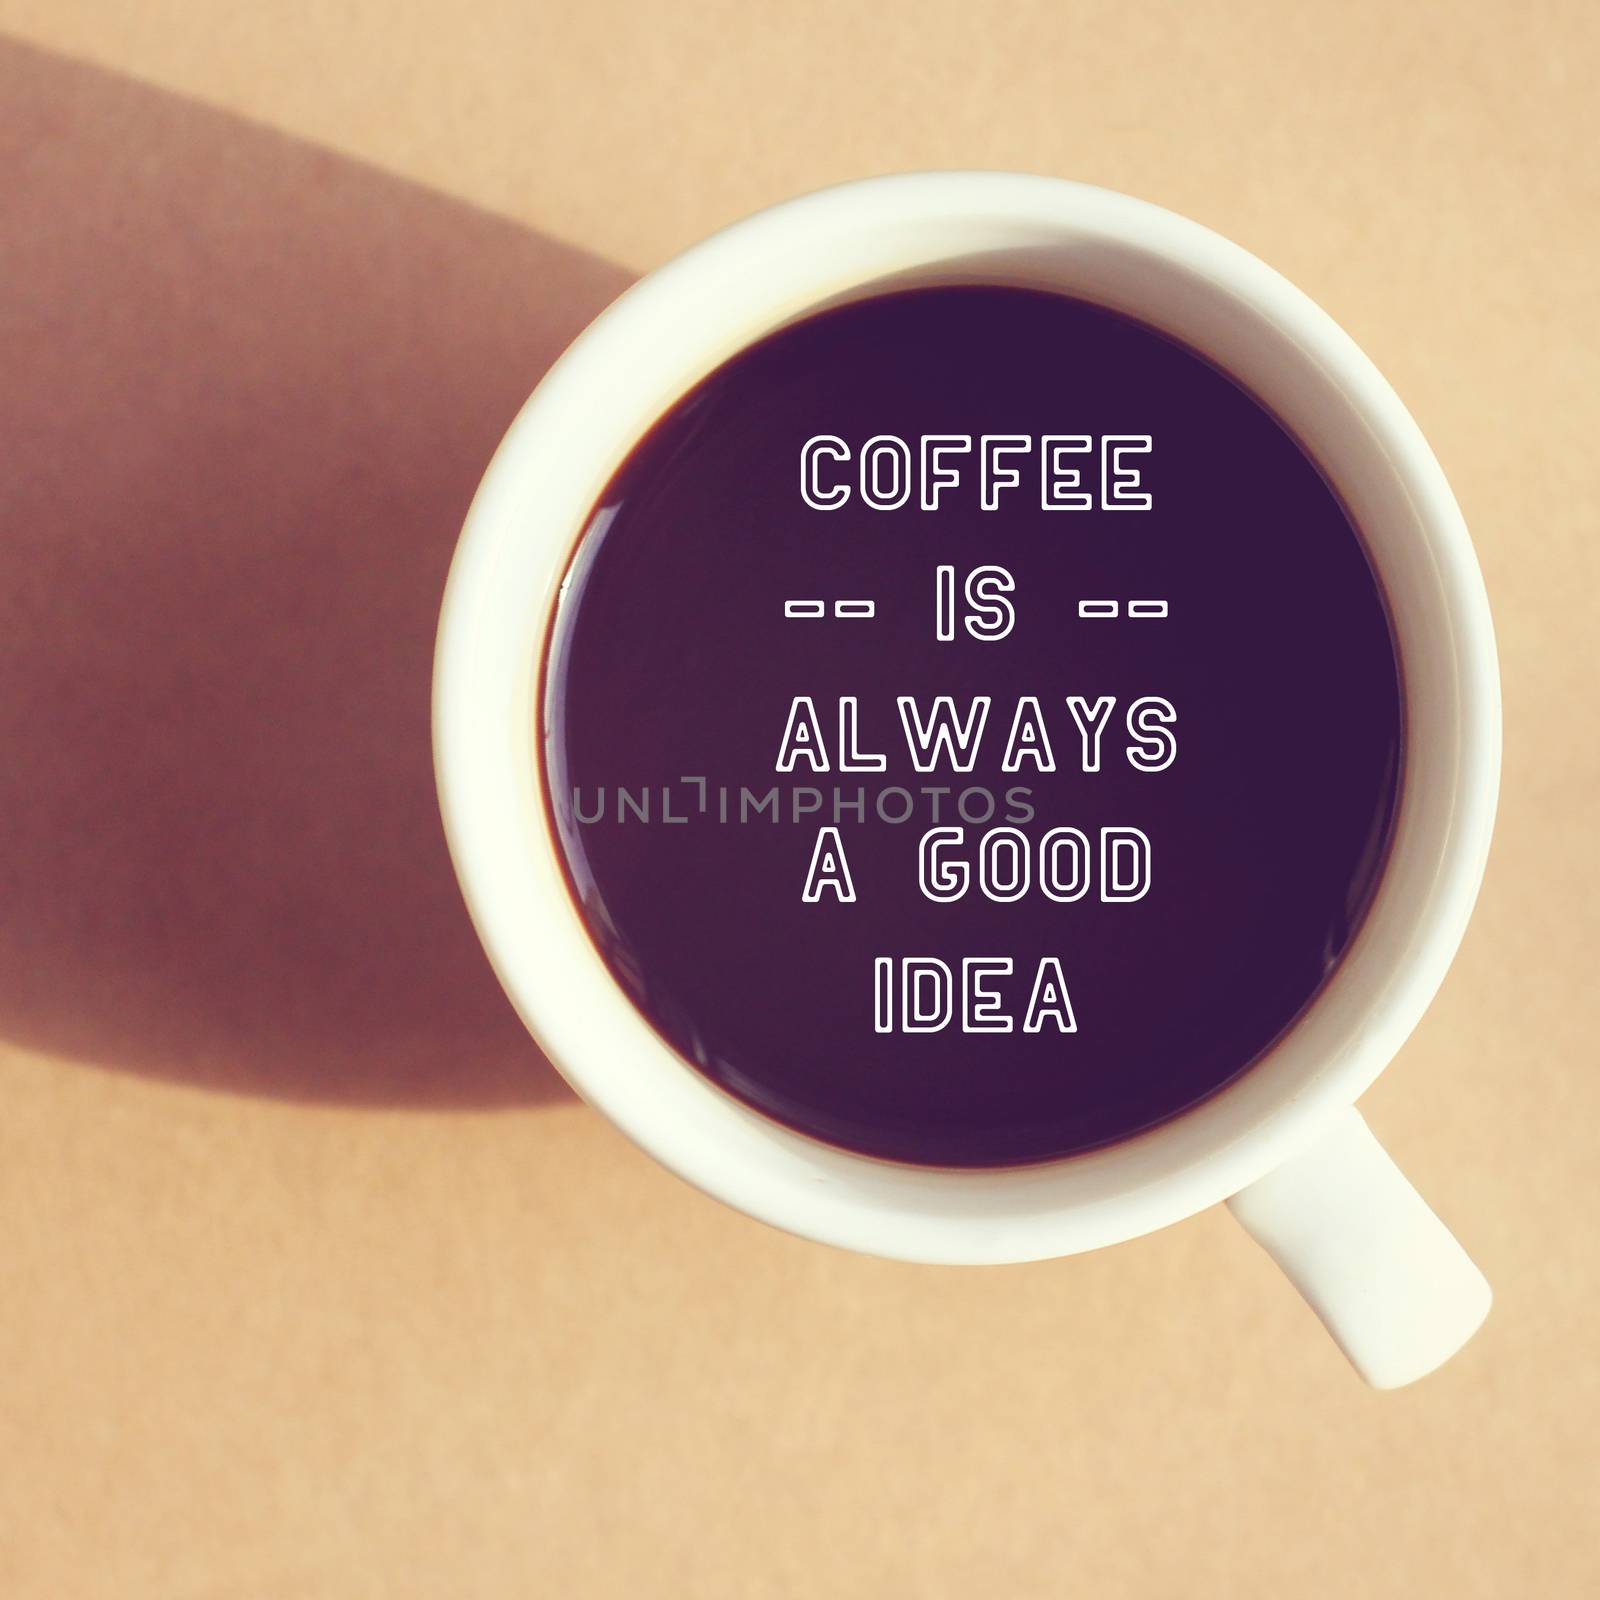 Inspirational quote on cup of coffee with retro filter effect by nuchylee